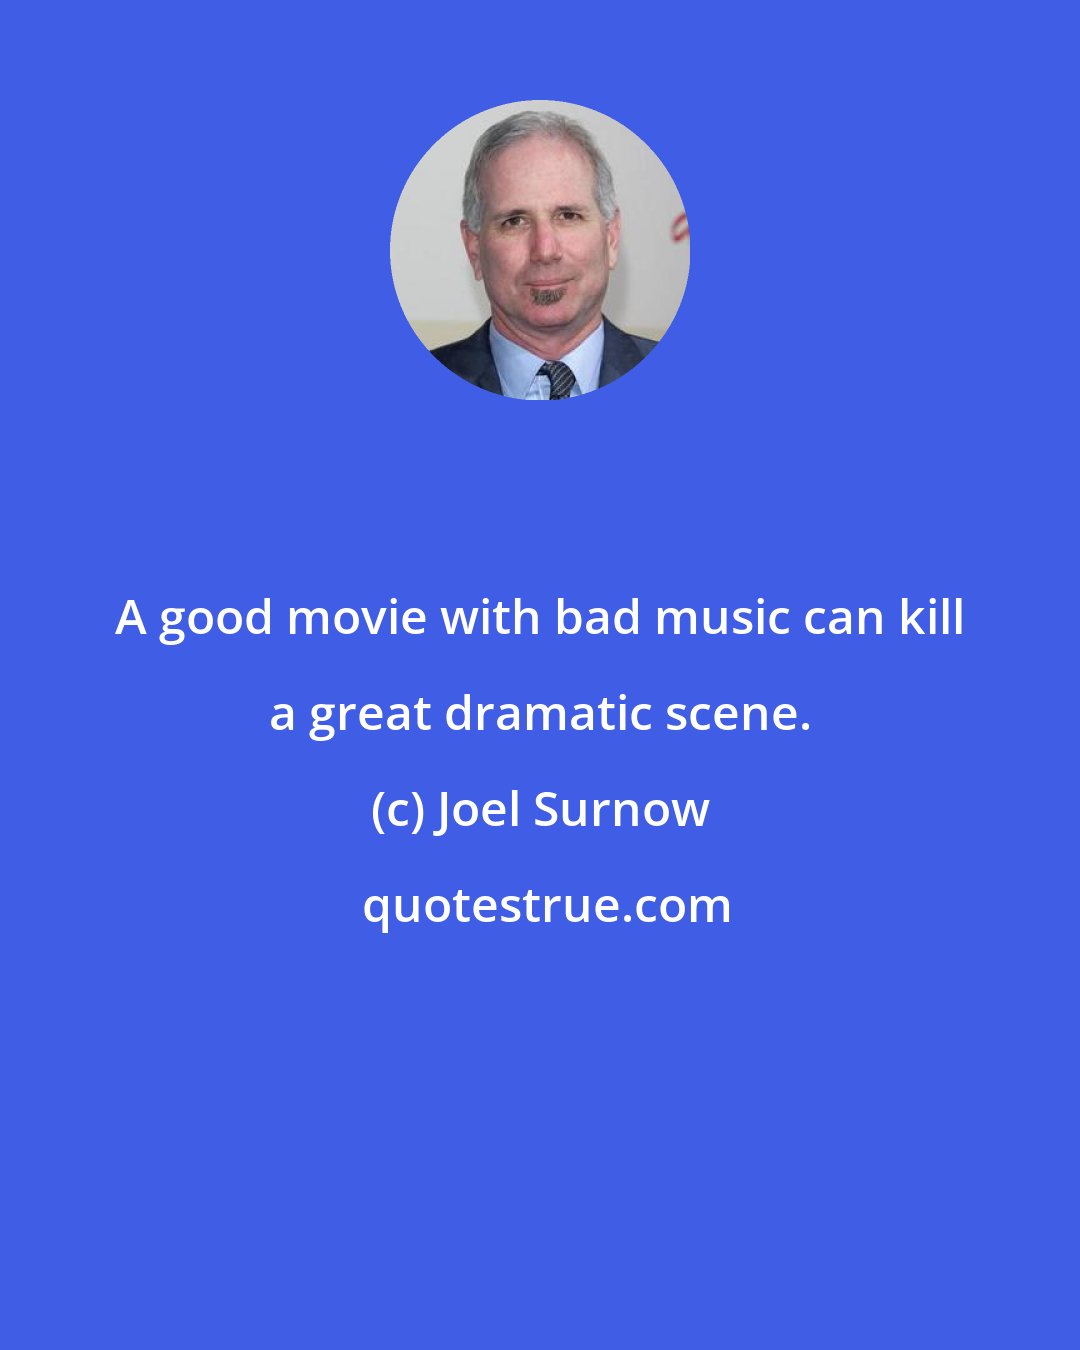 Joel Surnow: A good movie with bad music can kill a great dramatic scene.